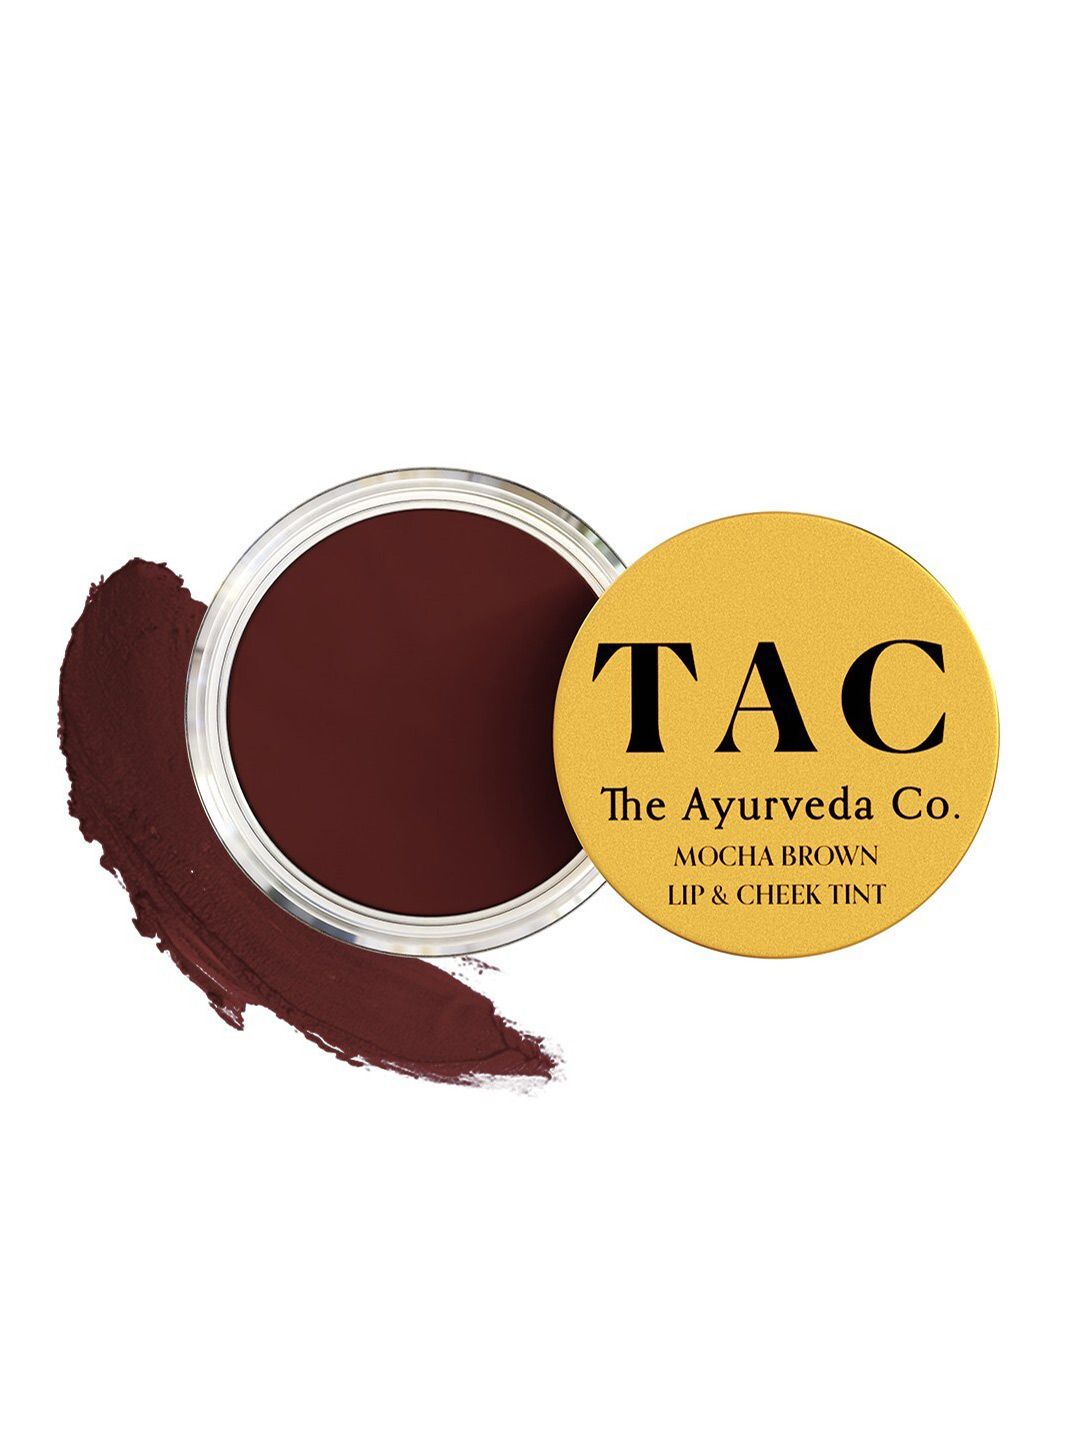 TAC - The Ayurveda Co. Mocha Brown Lip & Cheek Tint With Shea Butter - 5gm Price in India